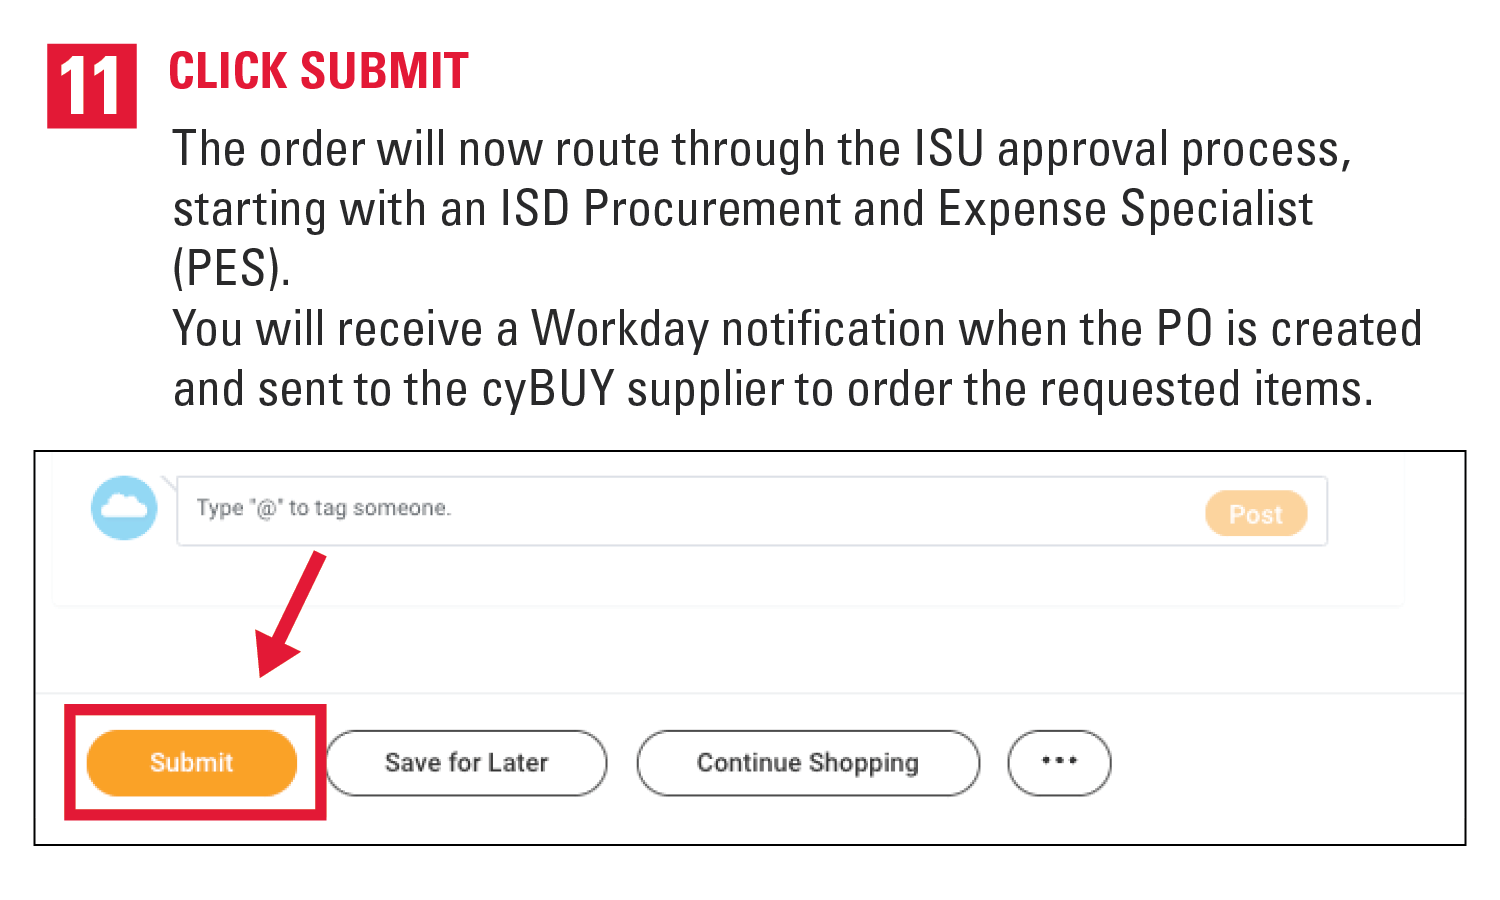 11. Click Submit. The order will now route through the ISU approval process, starting with an ISD Procurement and Expense Specialist (PES). You will receive a Workday notification when the PO is created and sent to the cyBUY supplier to order the requested items.